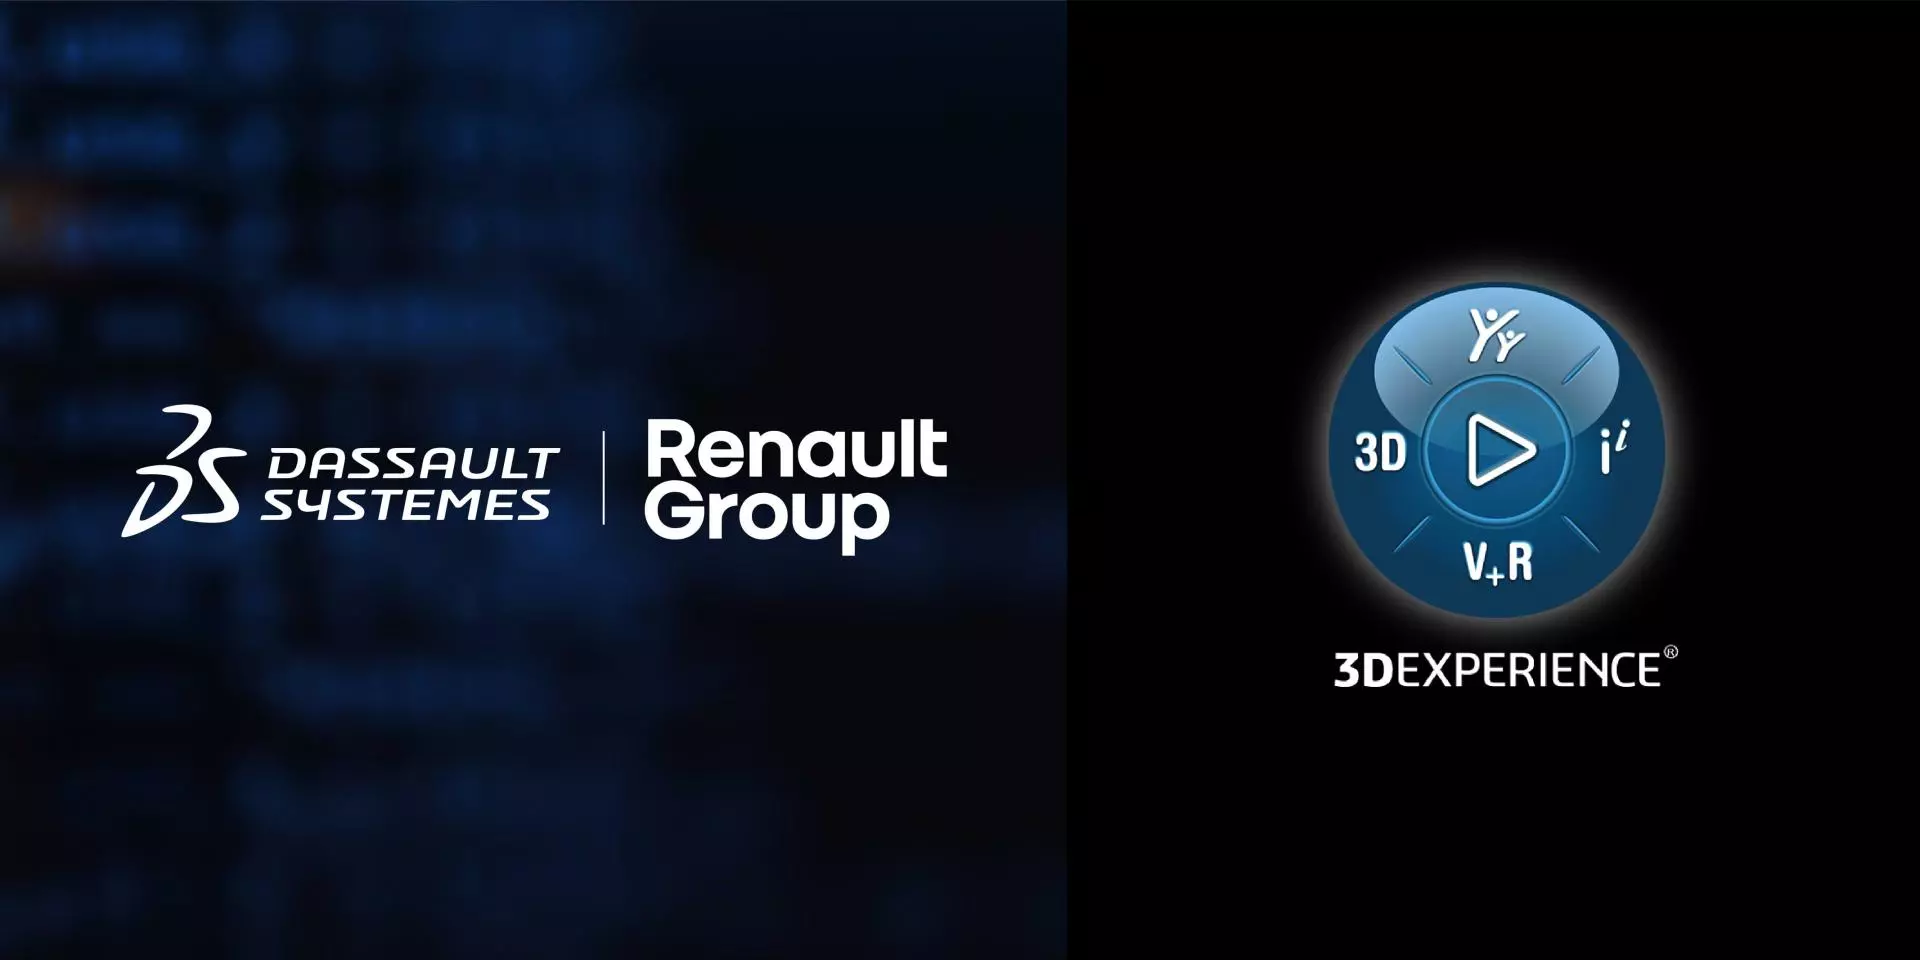 Renault Group Starts Using Dassault Systèmes' Technology for Innovation